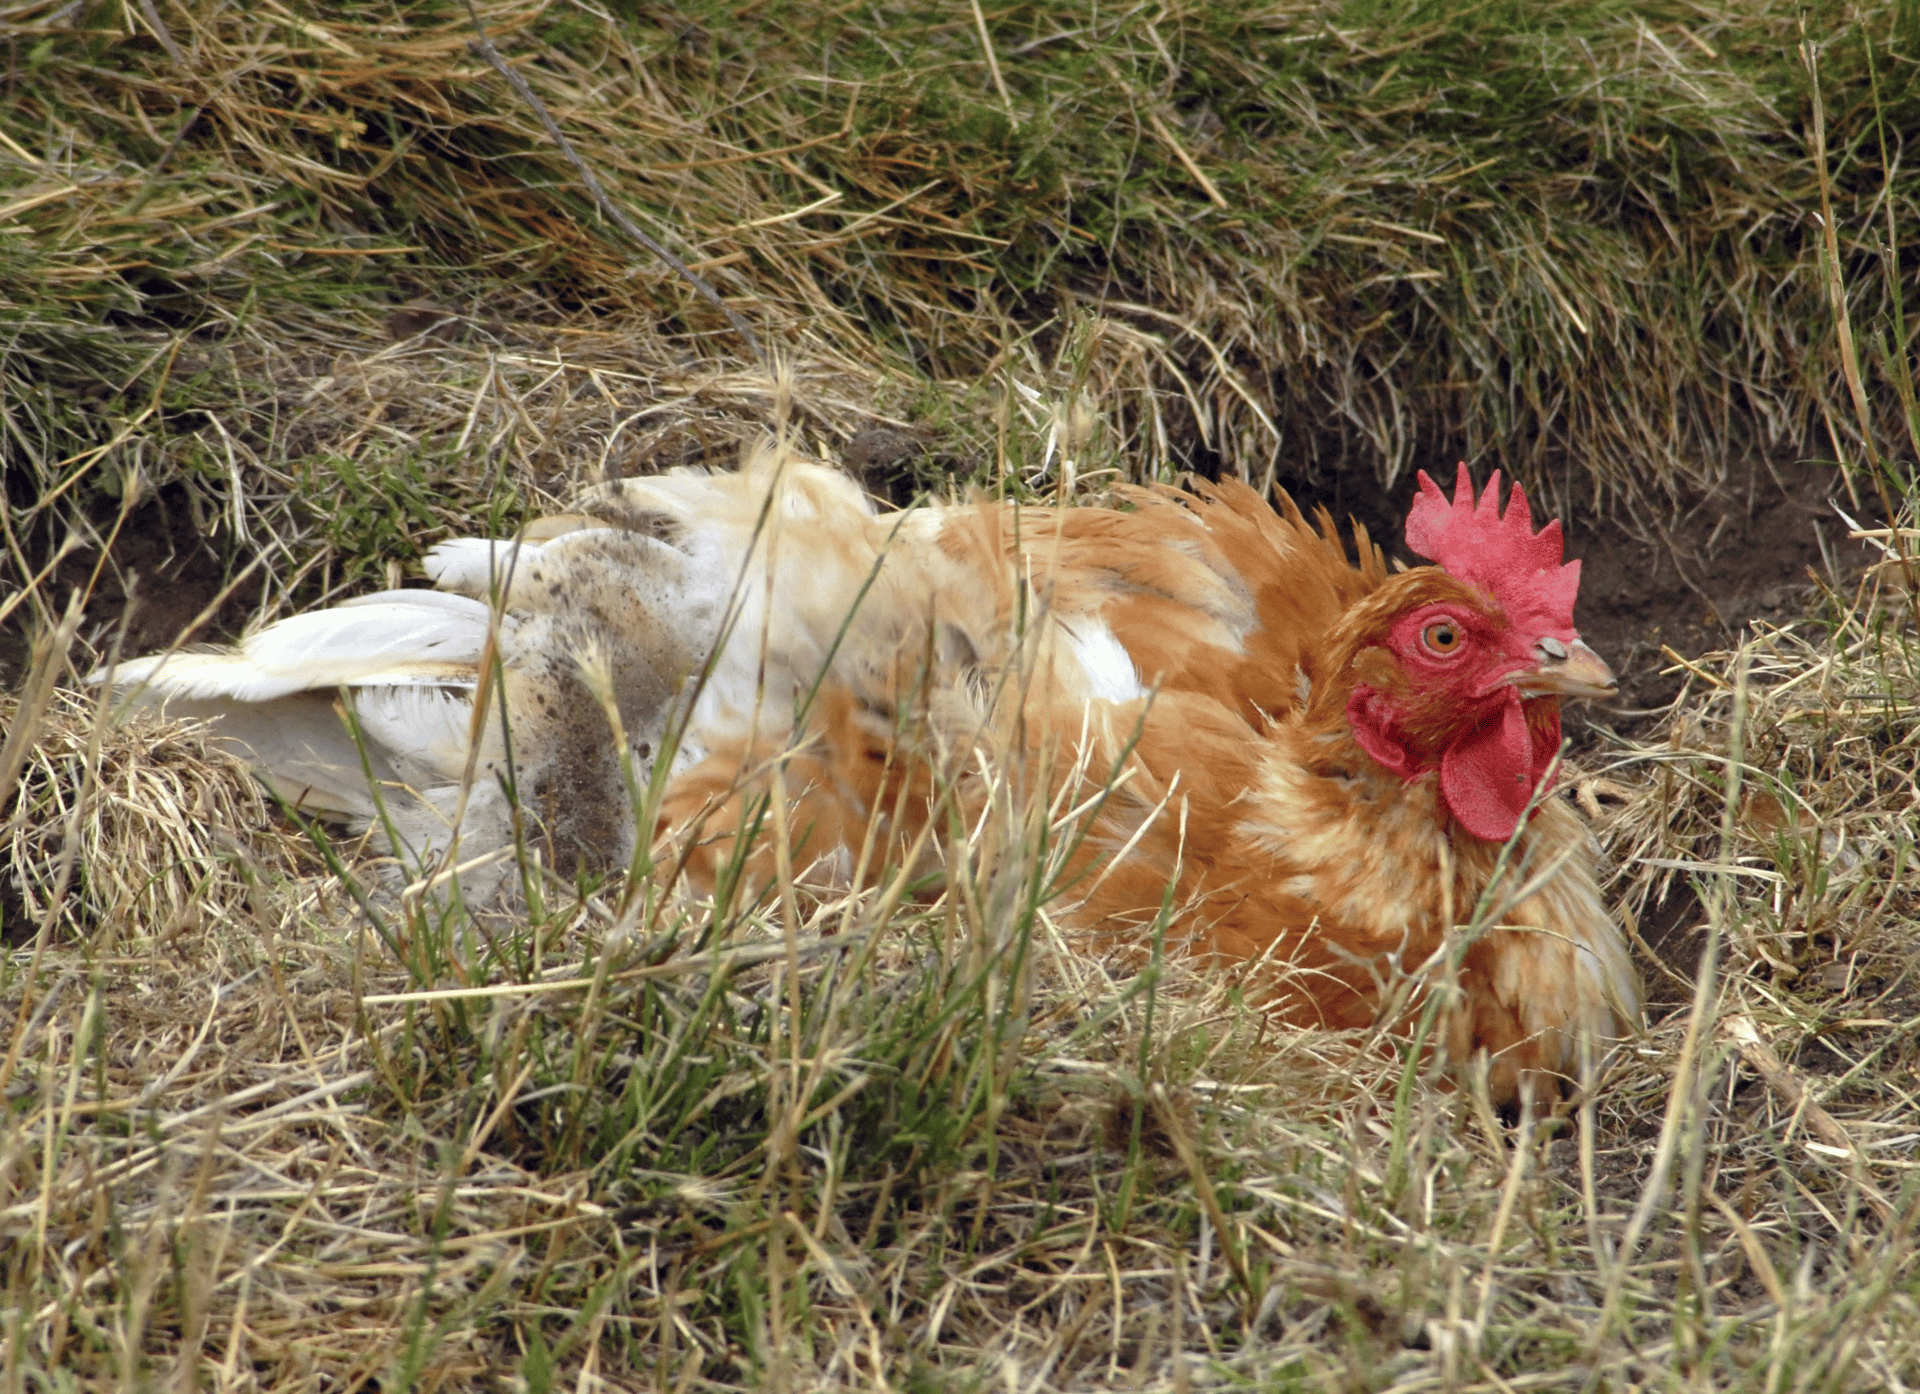 A brown chicken nestled in a ditch in the grass